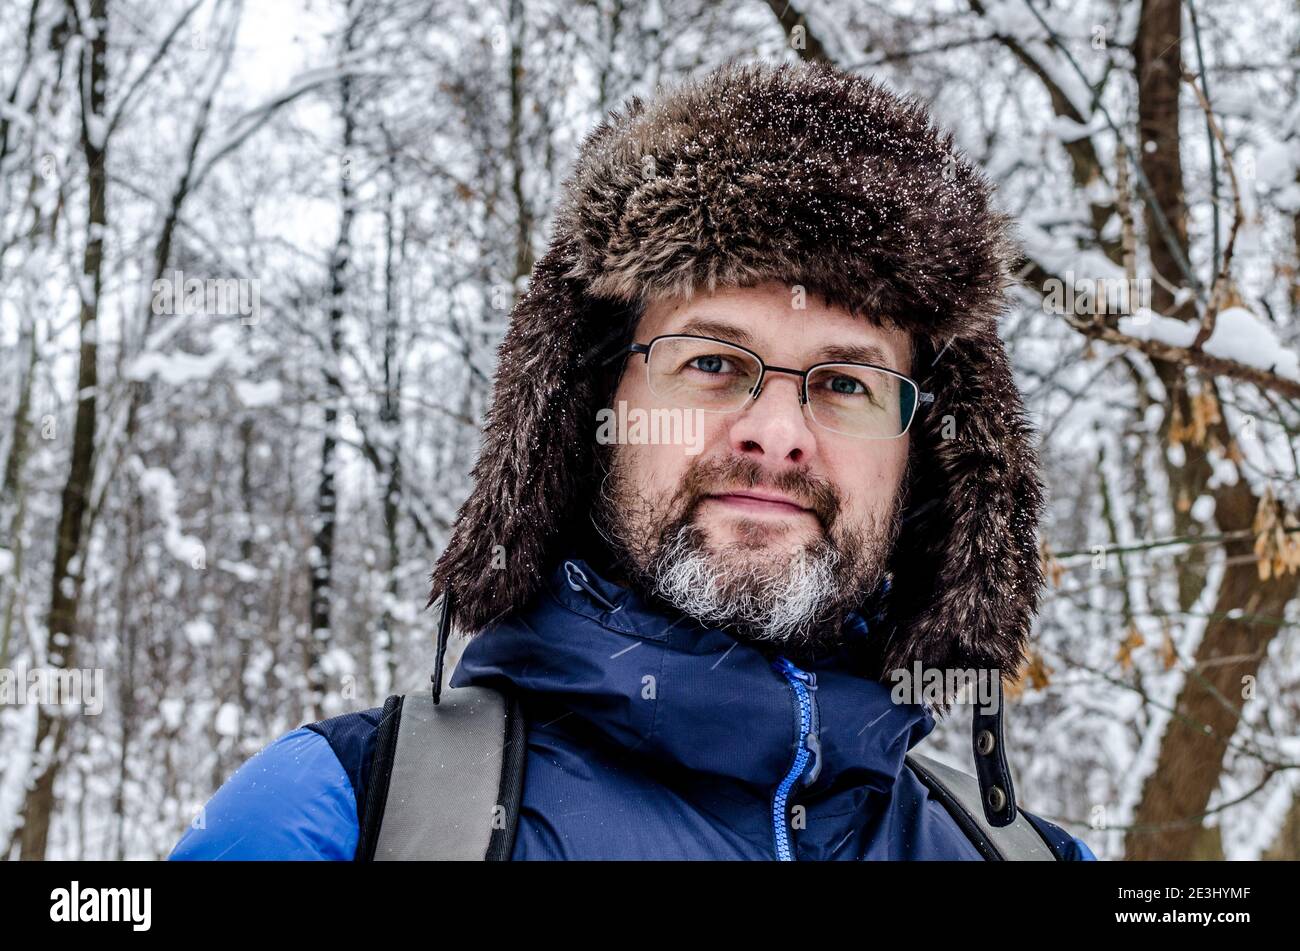 Portrait close up of a mddle aged man with grey beard in a snowy winter forest Stock Photo